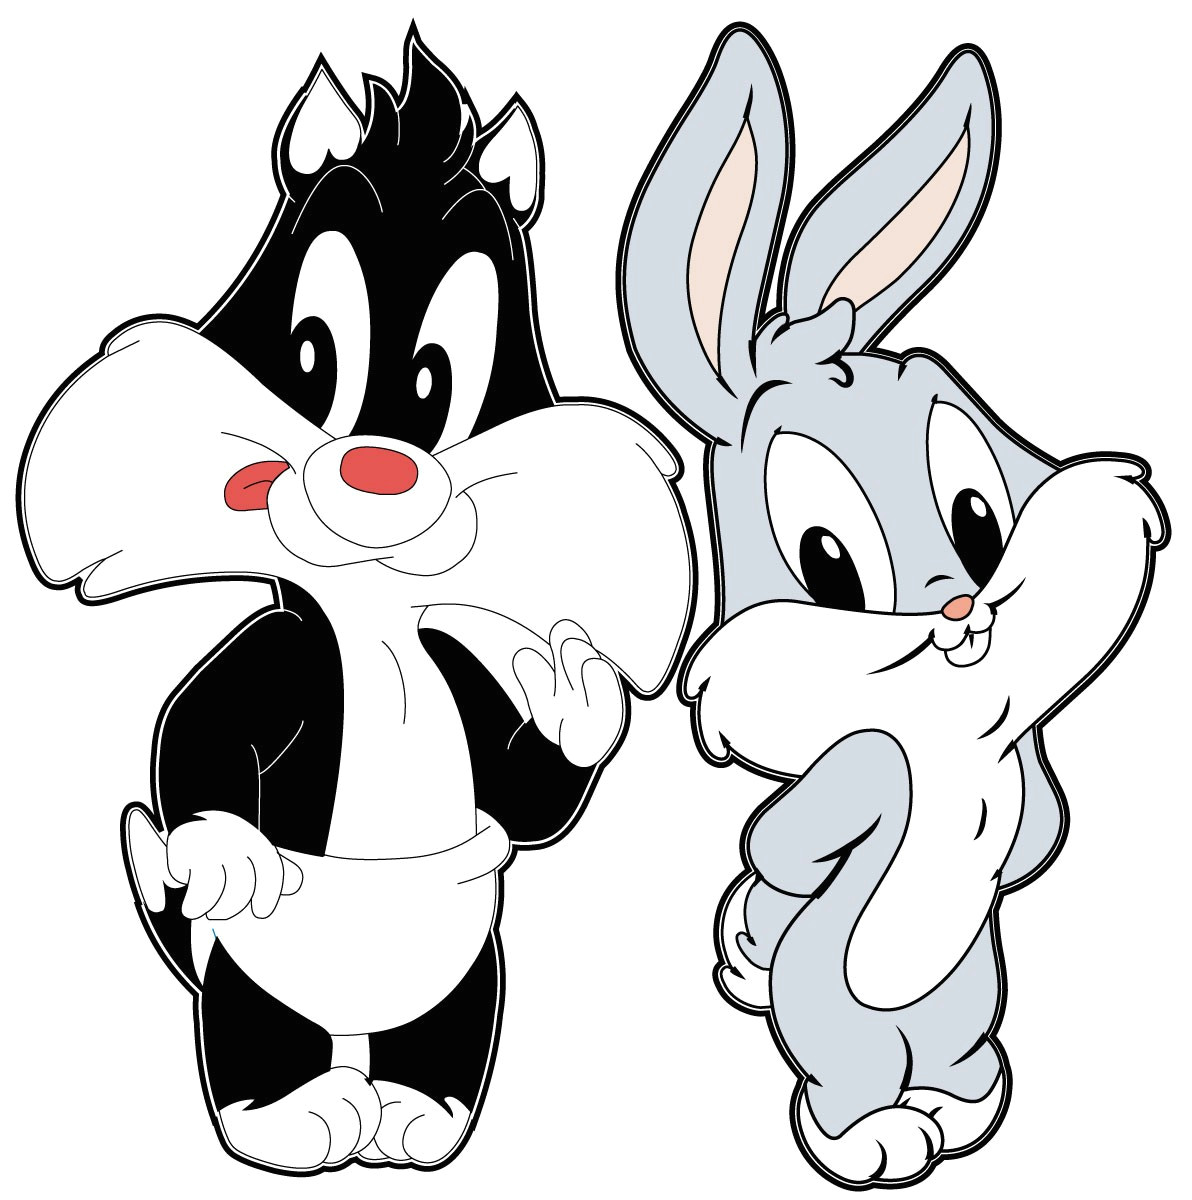 drawing a cartoon bunny baby sylvester and baby bugs bunny wallpaper for free download